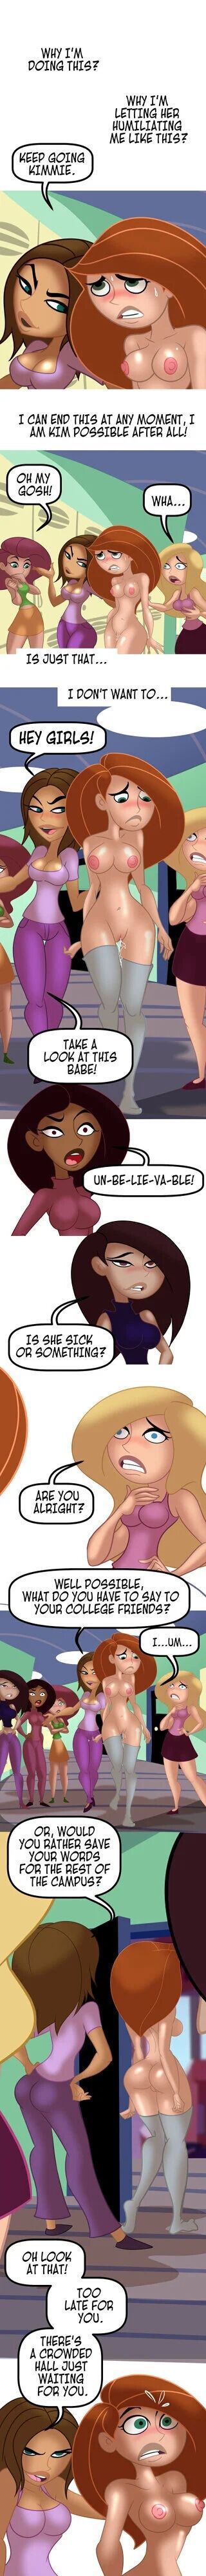 Kinky Possible - A Villain's Bitch Remastered (Kim Possible) [Tease Comix] - 4 - ongoing - english 5